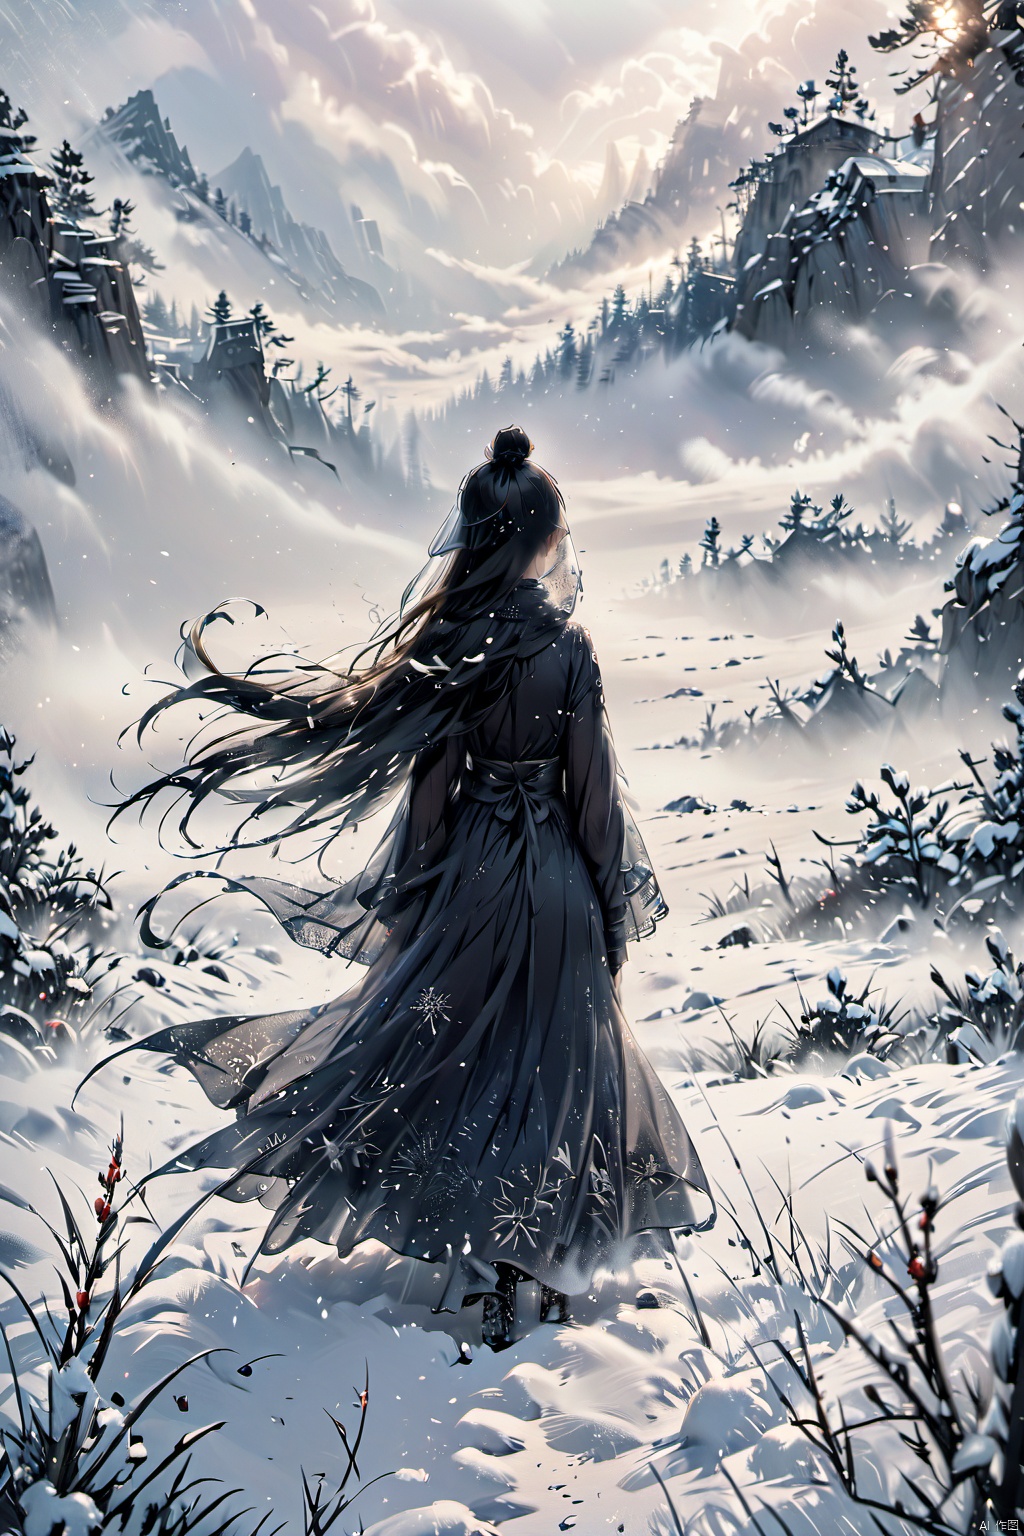  Amidst a raging blizzard, a solitary figure stands resilient in a snow-covered field, viewed from behind. The girl's silhouette is barely discernible through the thick veil of swirling snowflakes. Despite the intensity of the storm, there's an aura of serenity and strength emanating from her presence, as she stands amidst the chaotic beauty of the blizzard's embrace. The field of view captures the vastness of the wintry landscape, emphasizing the girl's solitary stance against the elements, more_details:-1, more_details:0, more_details:0.5, more_details:1, more_details:1.5